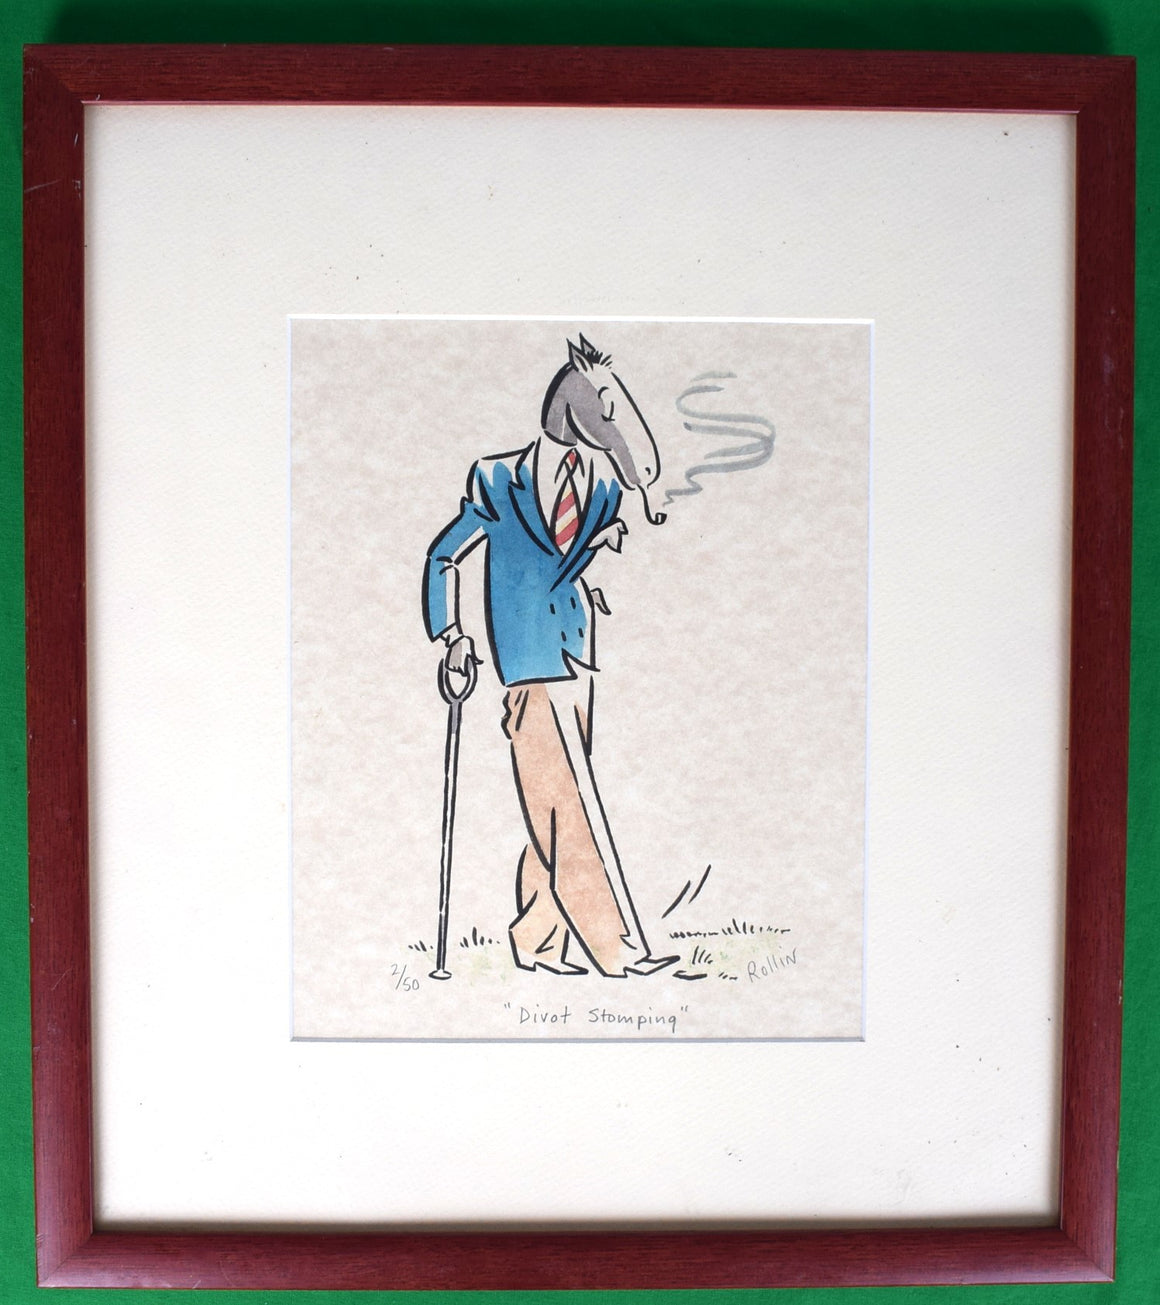 "Divot Stomping" by Rollin McGrail